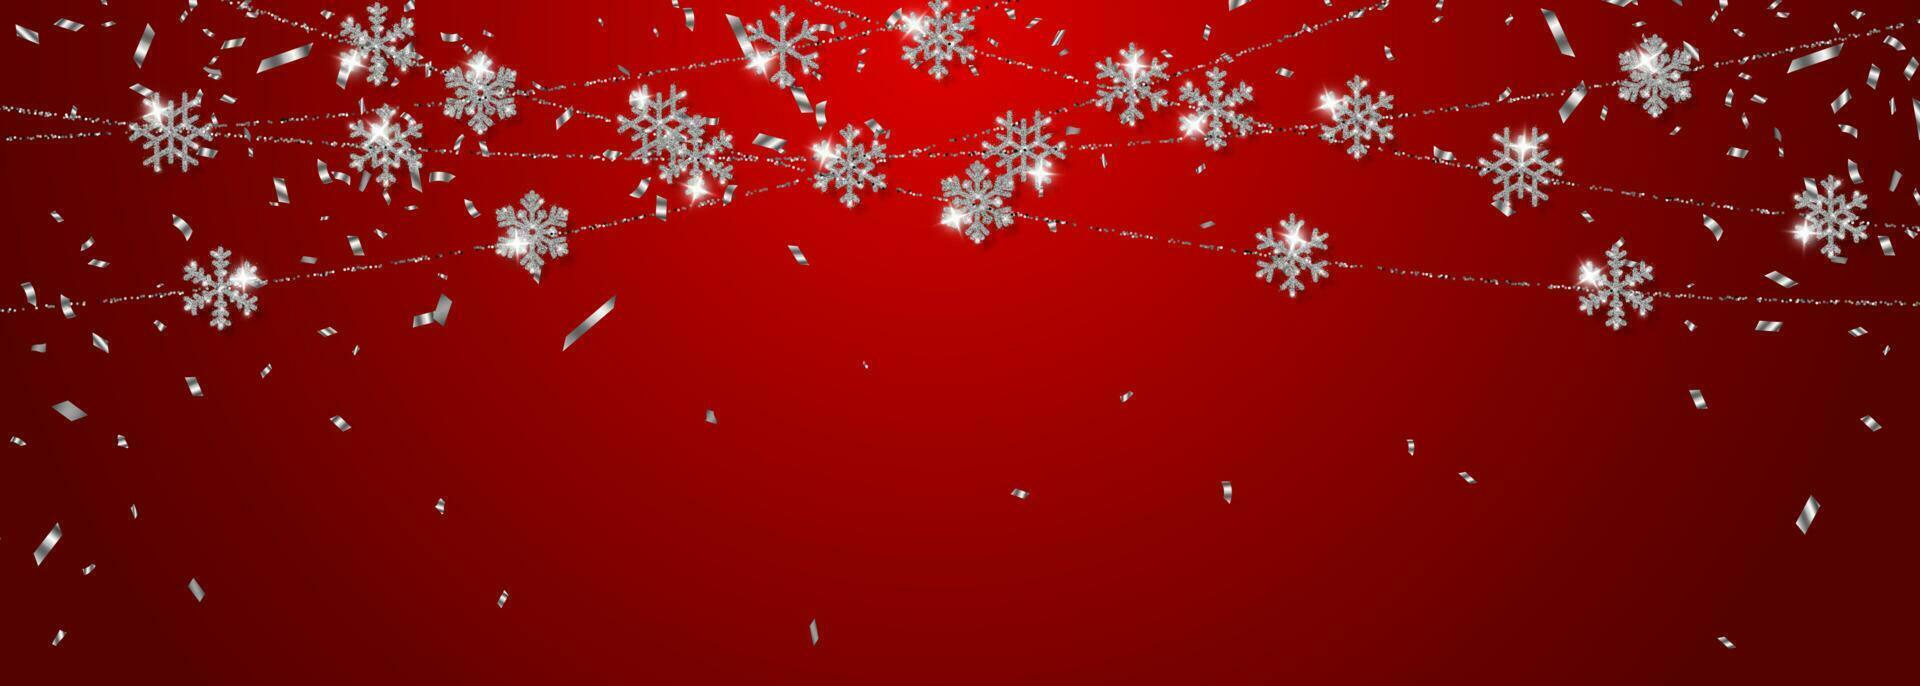 Christmas or New Year silver snowflake decoration garland on red background. Hanging glitter snowflake. Vector illustration